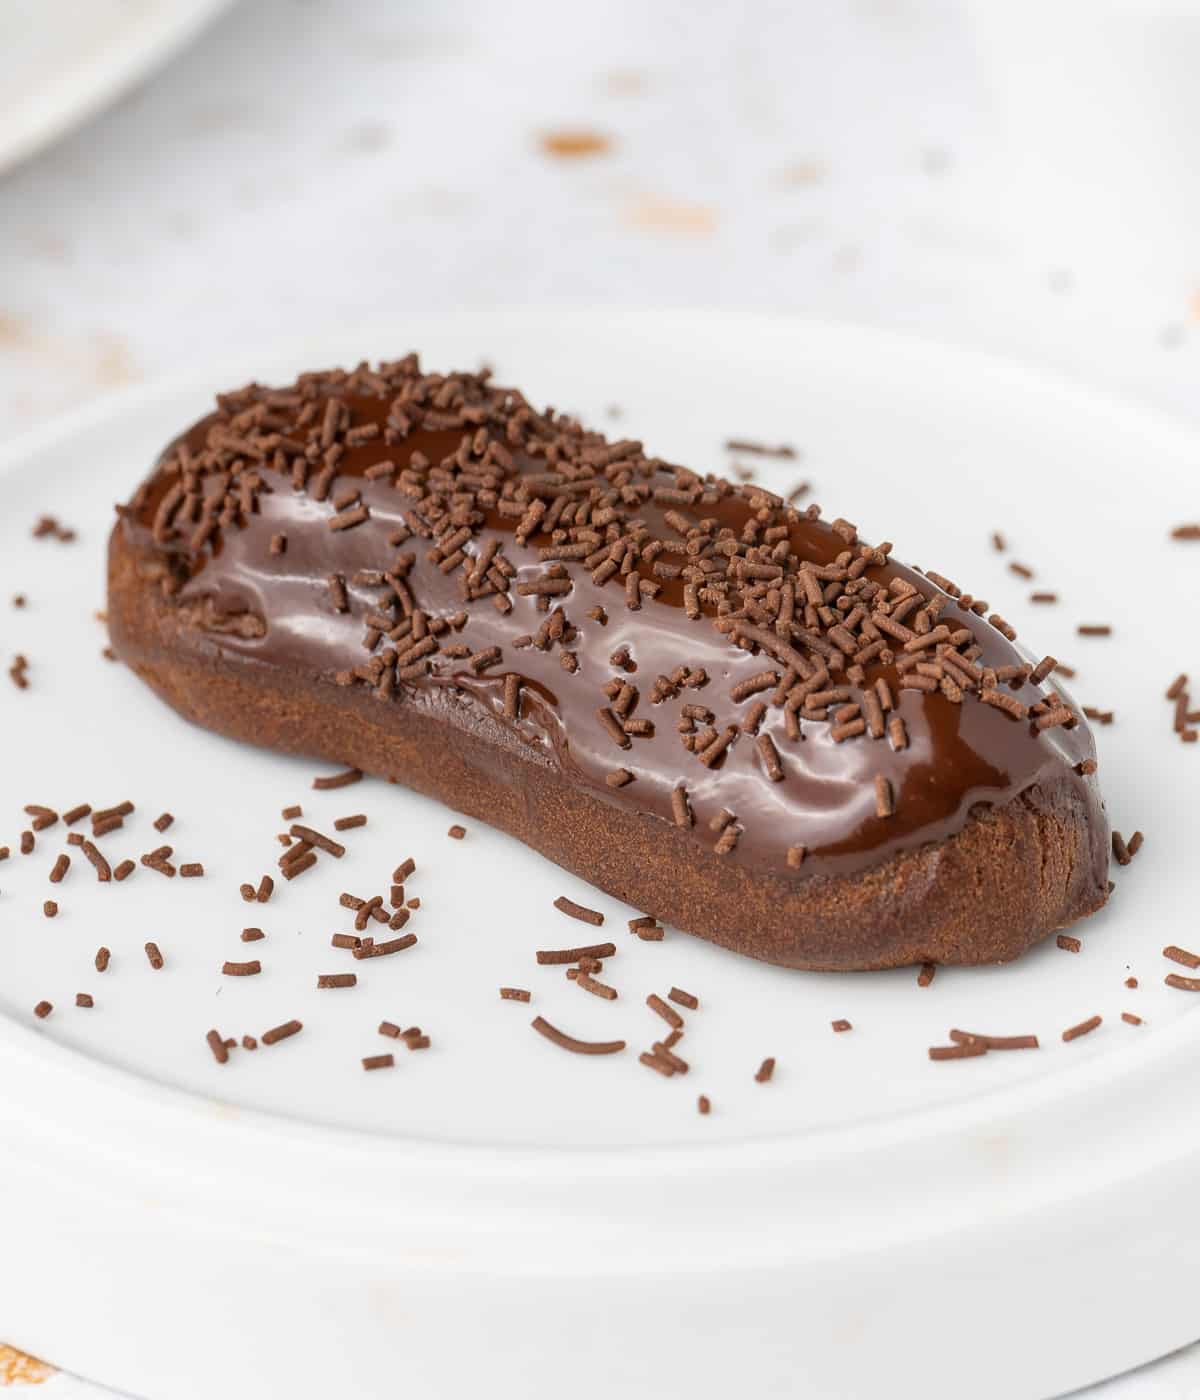 Eclair topped with chocolate sprinkles over a white plate.